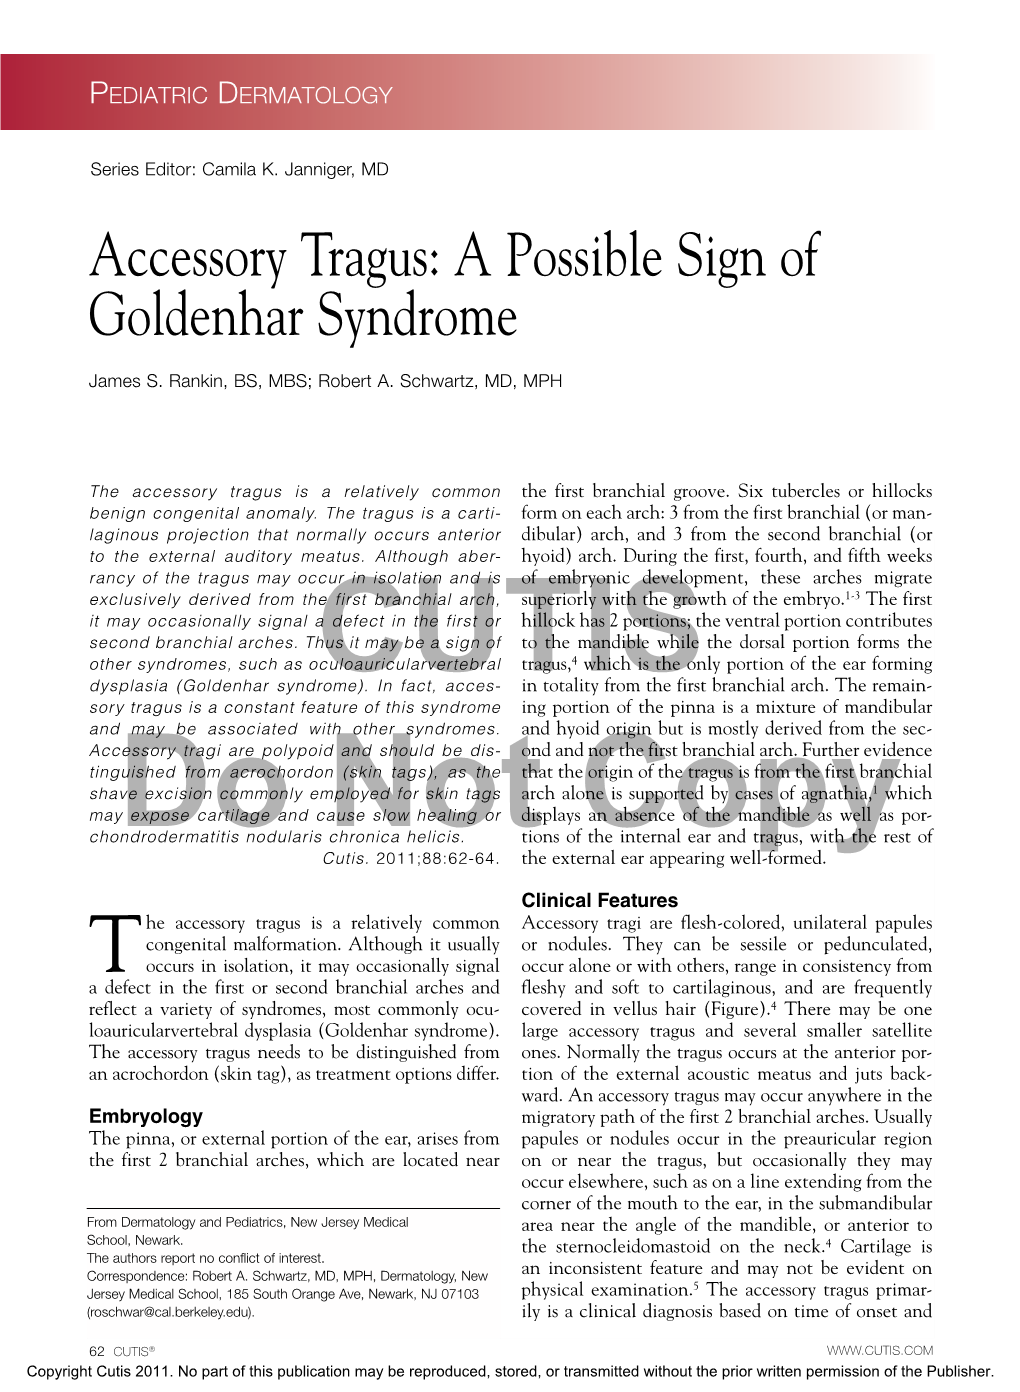 Accessory Tragus: a Possible Sign of Goldenhar Syndrome